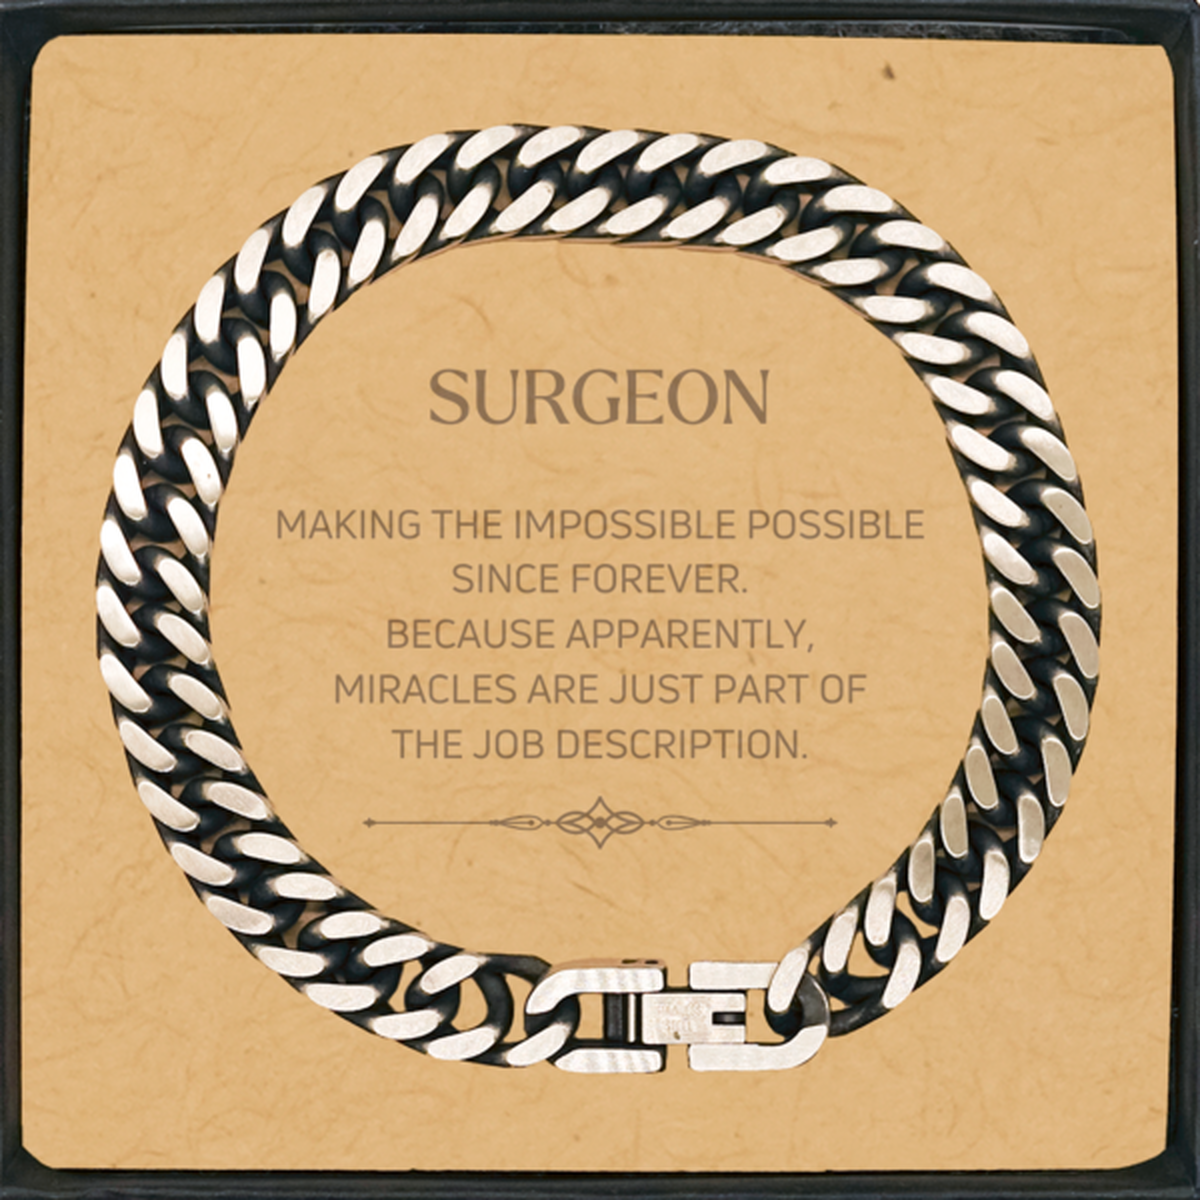 Funny Surgeon Gifts, Miracles are just part of the job description, Inspirational Birthday Cuban Link Chain Bracelet For Surgeon, Men, Women, Coworkers, Friends, Boss